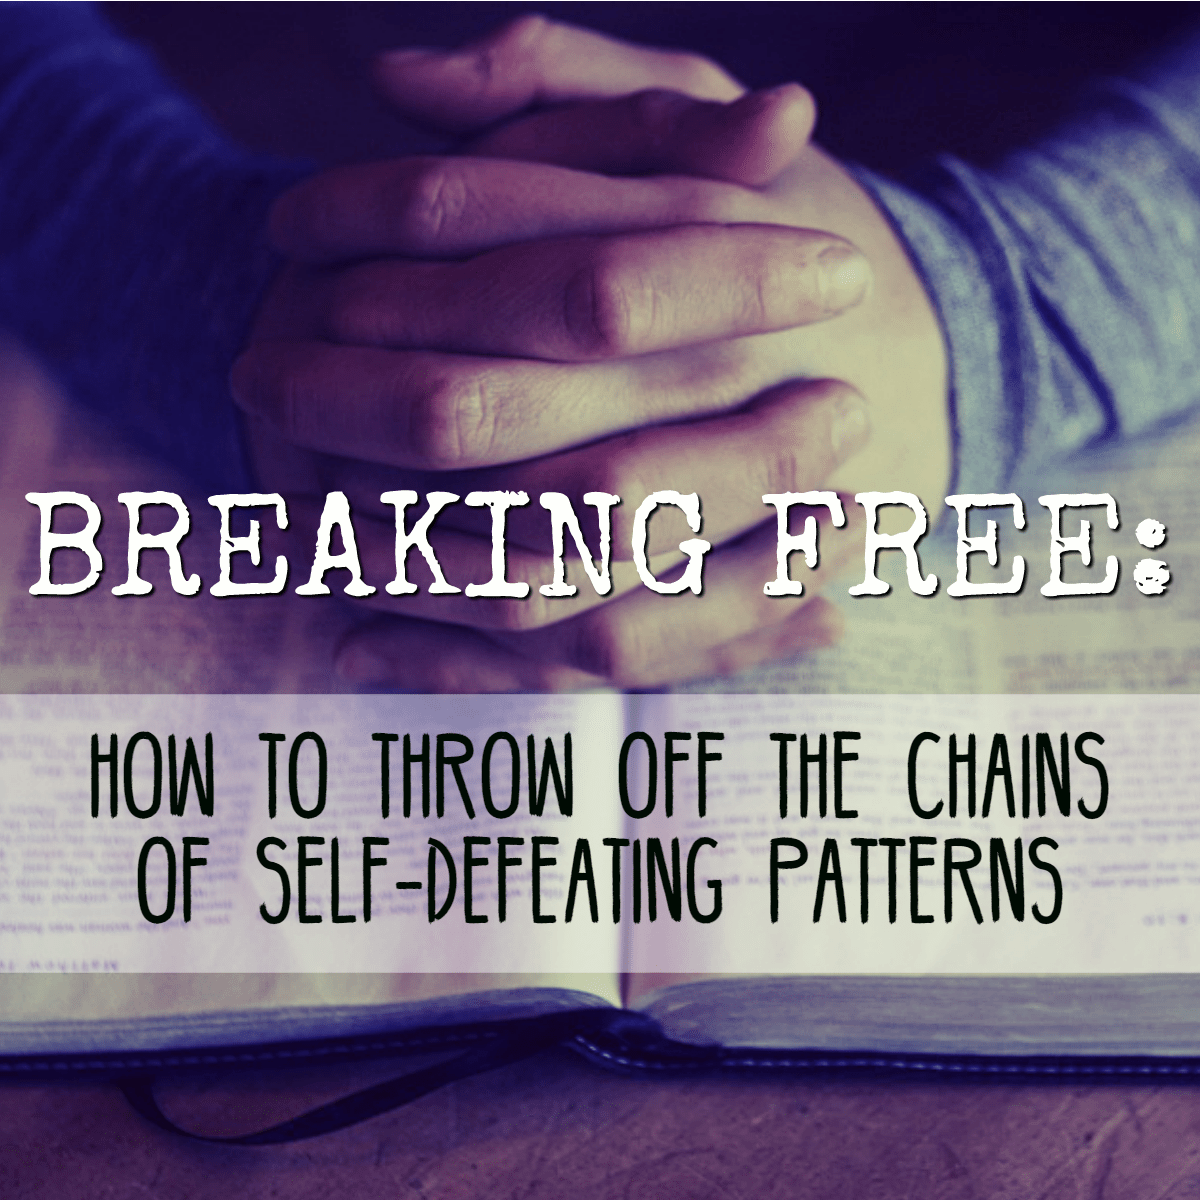 Breaking Free: How to throw off the chains of self-defeating patterns